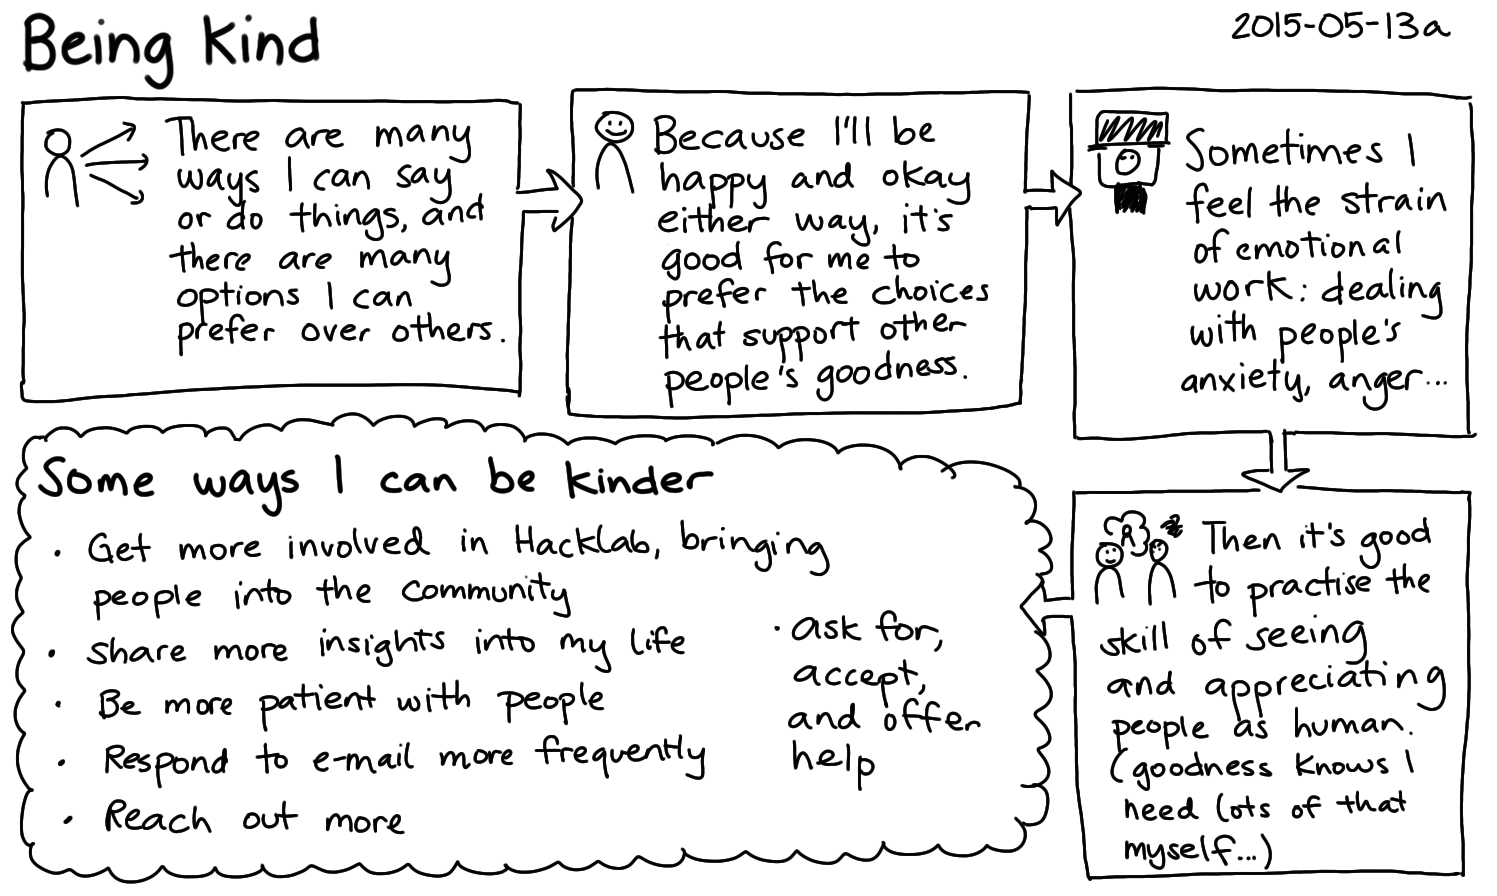 2015-05-13a Being kind -- index card #kindness #connecting #stoicism.png